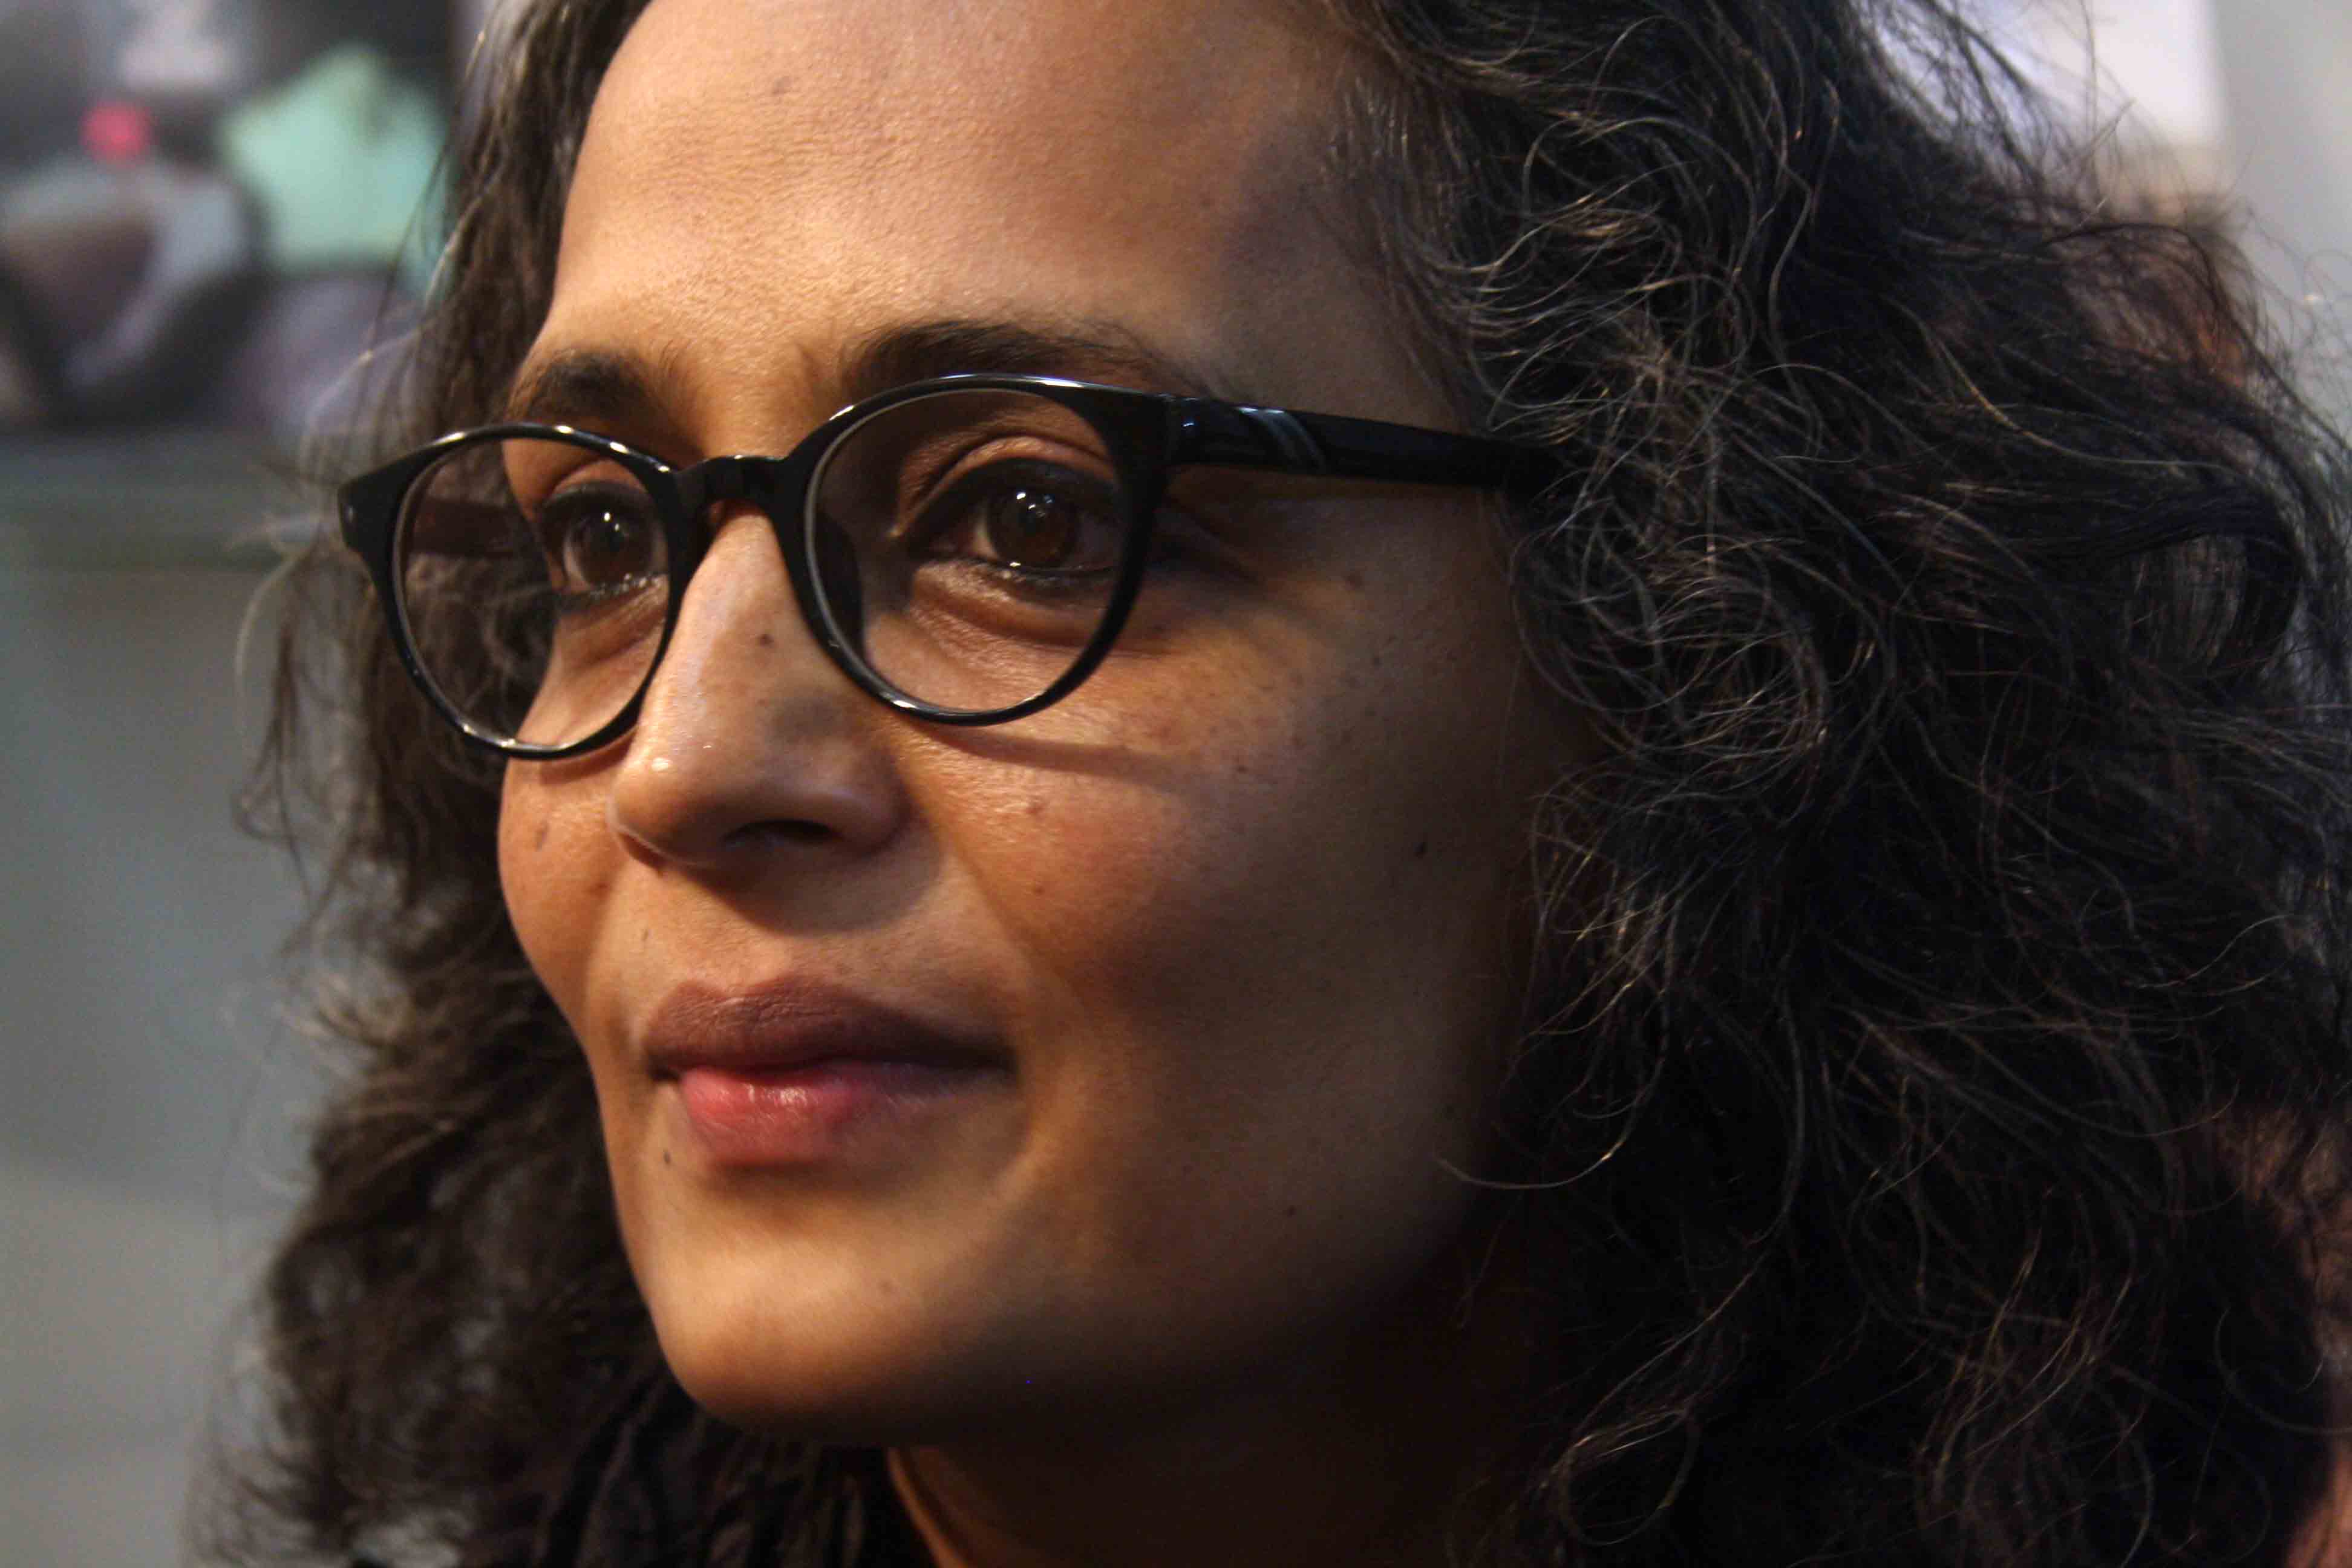 Letter Leaks - Author Ananya Vajpeyi Secretly Tried to Get Dr Ambedkar's 'Annihilation of Caste' introduced by Arundhati Roy Banned